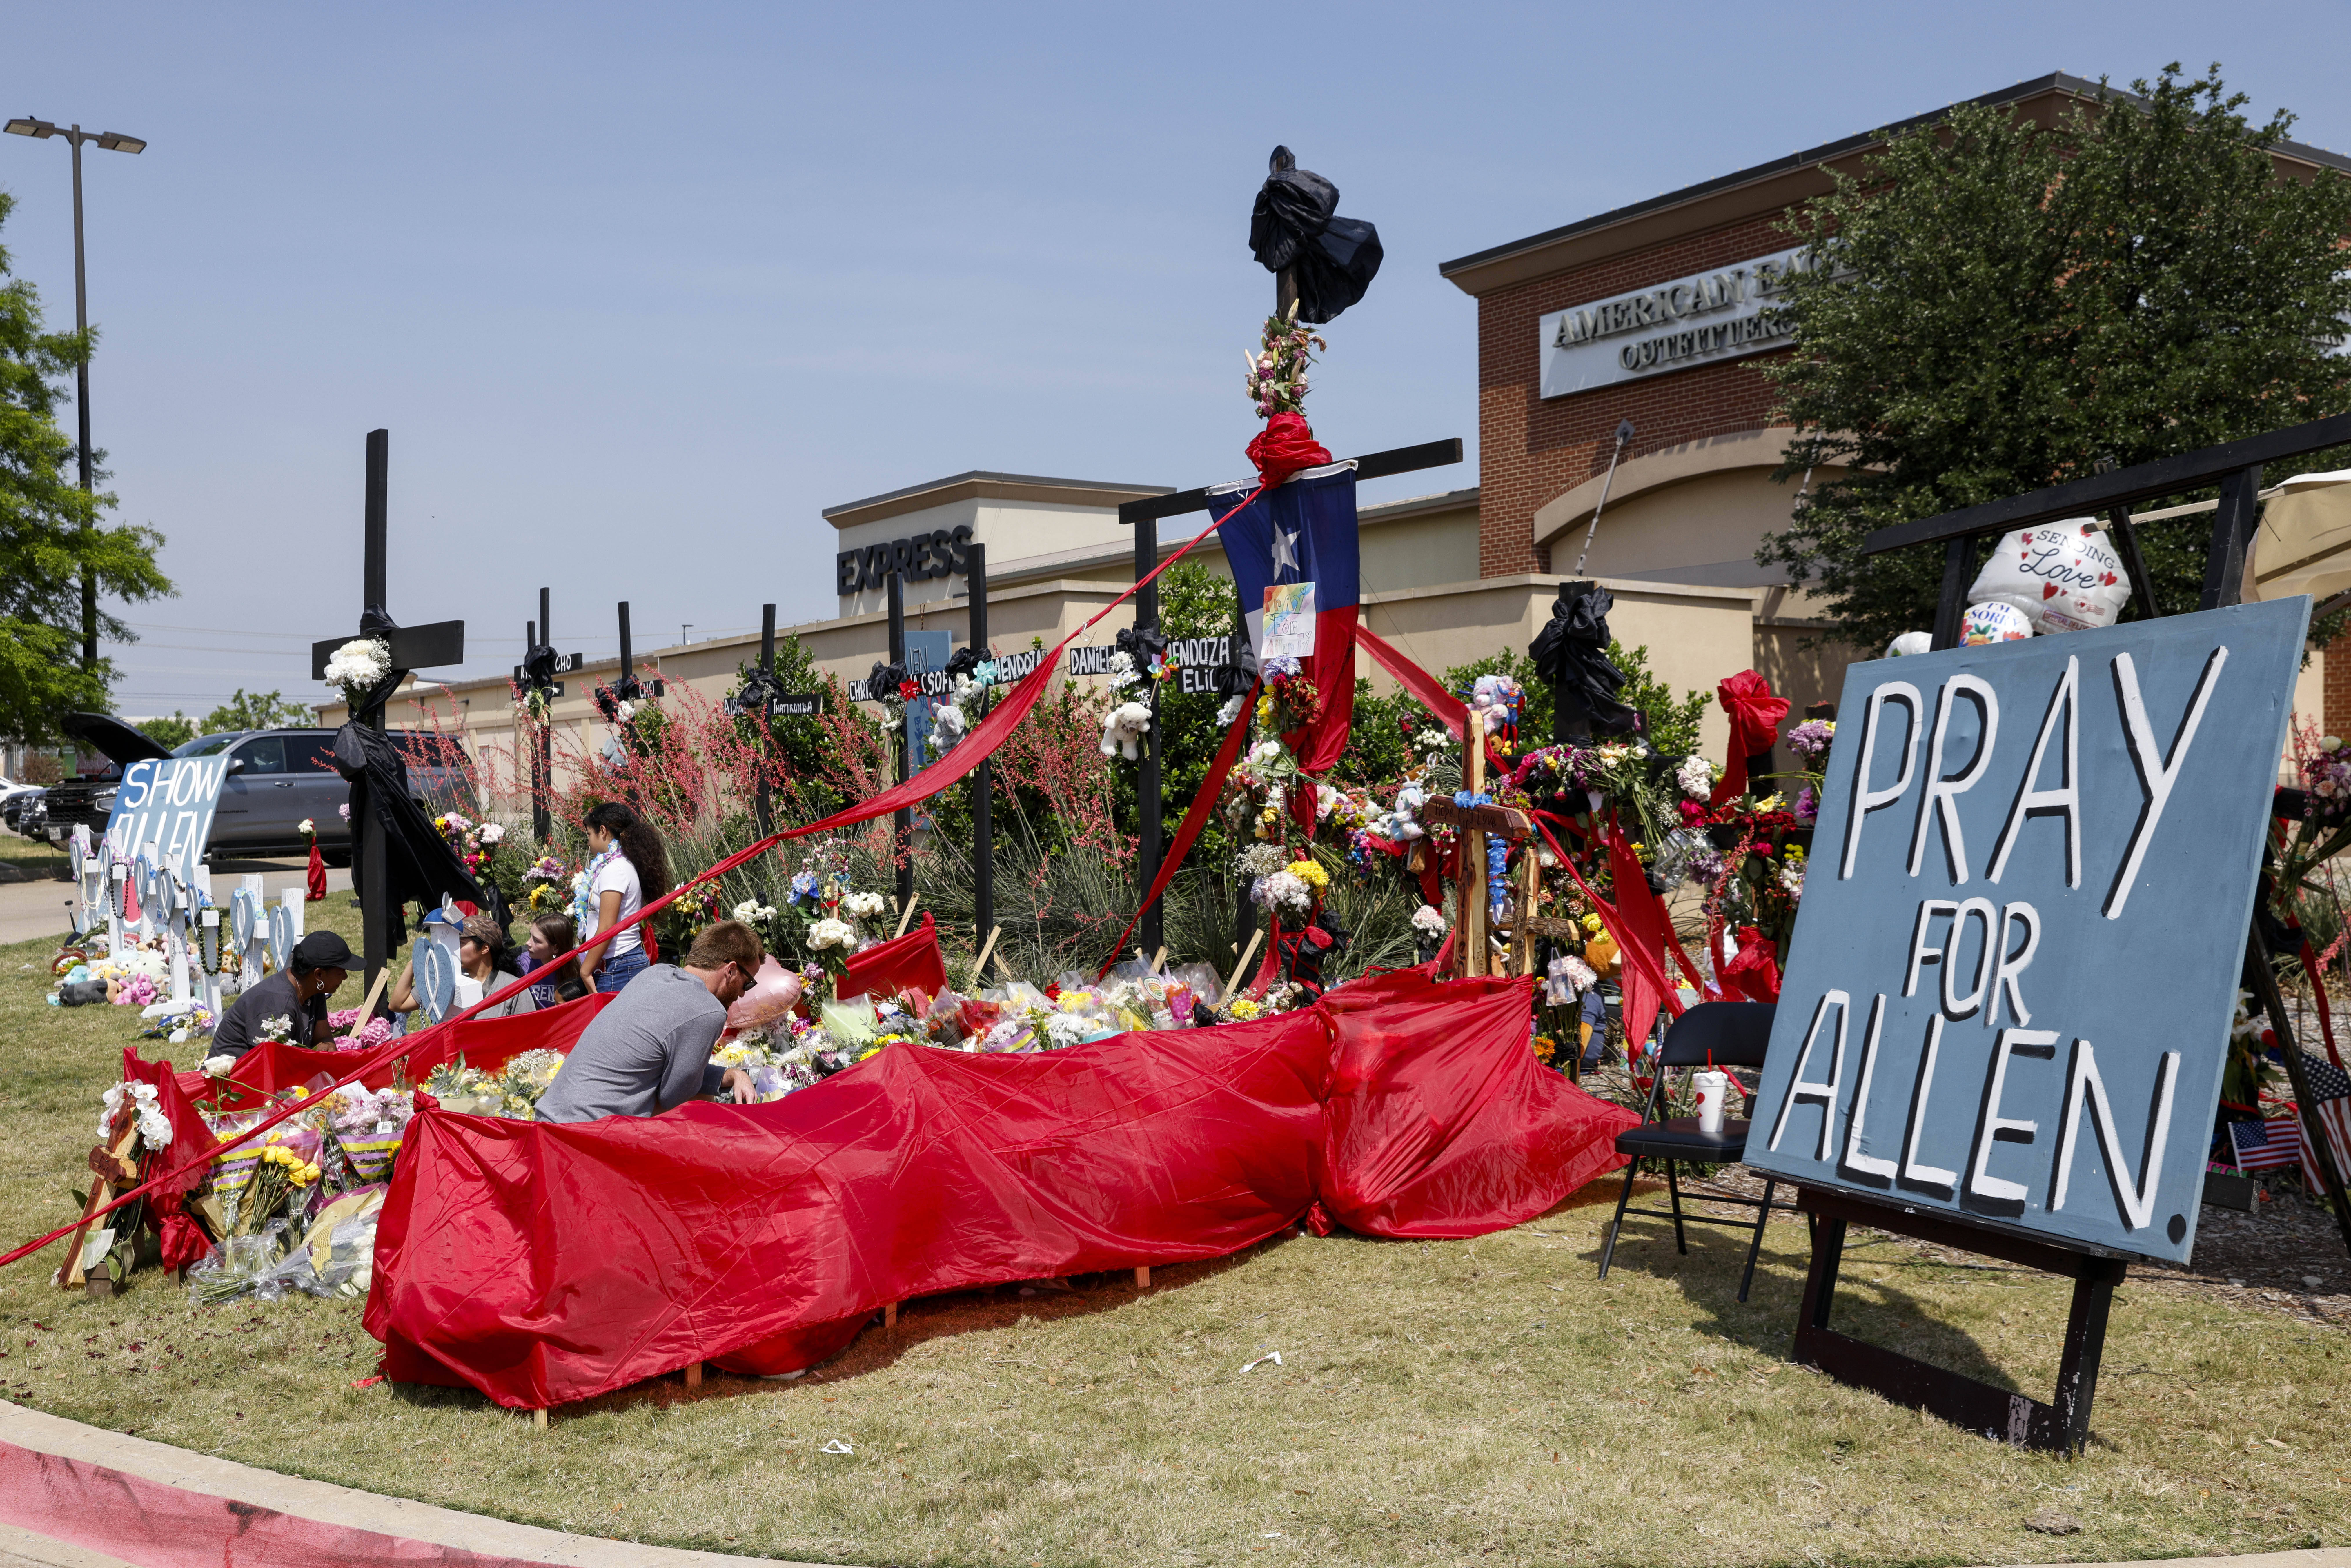 People place flowers and pay their respects at a memorial for victims of the Allen Premium Outlets ...